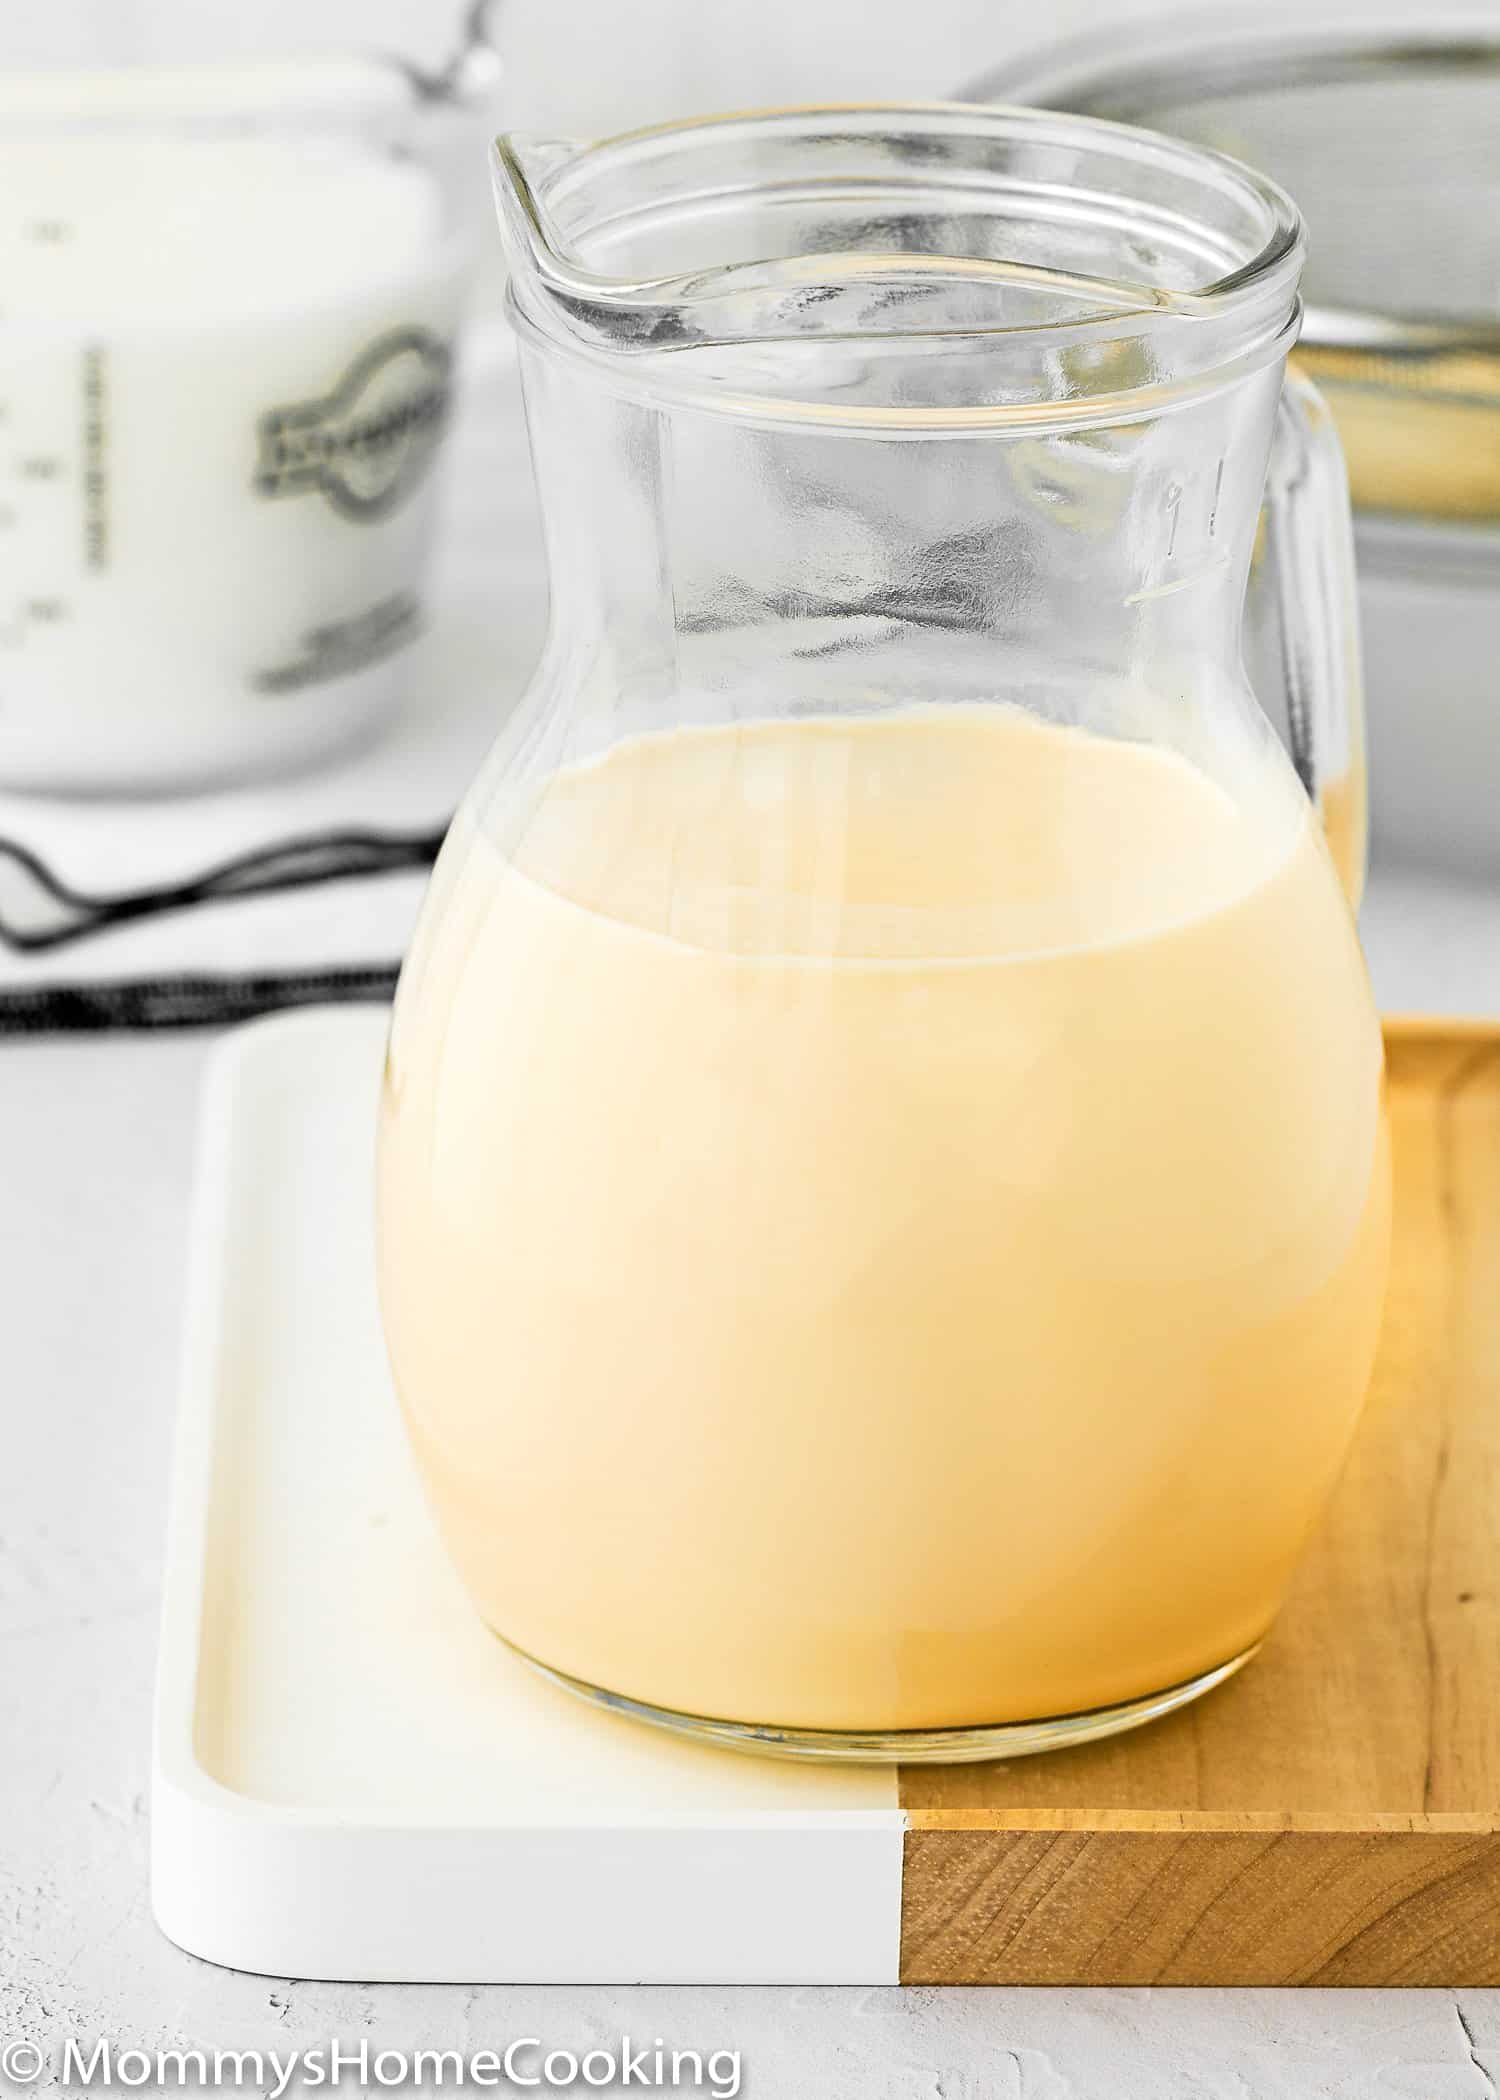 Homemade evaporated milk in a glass container.